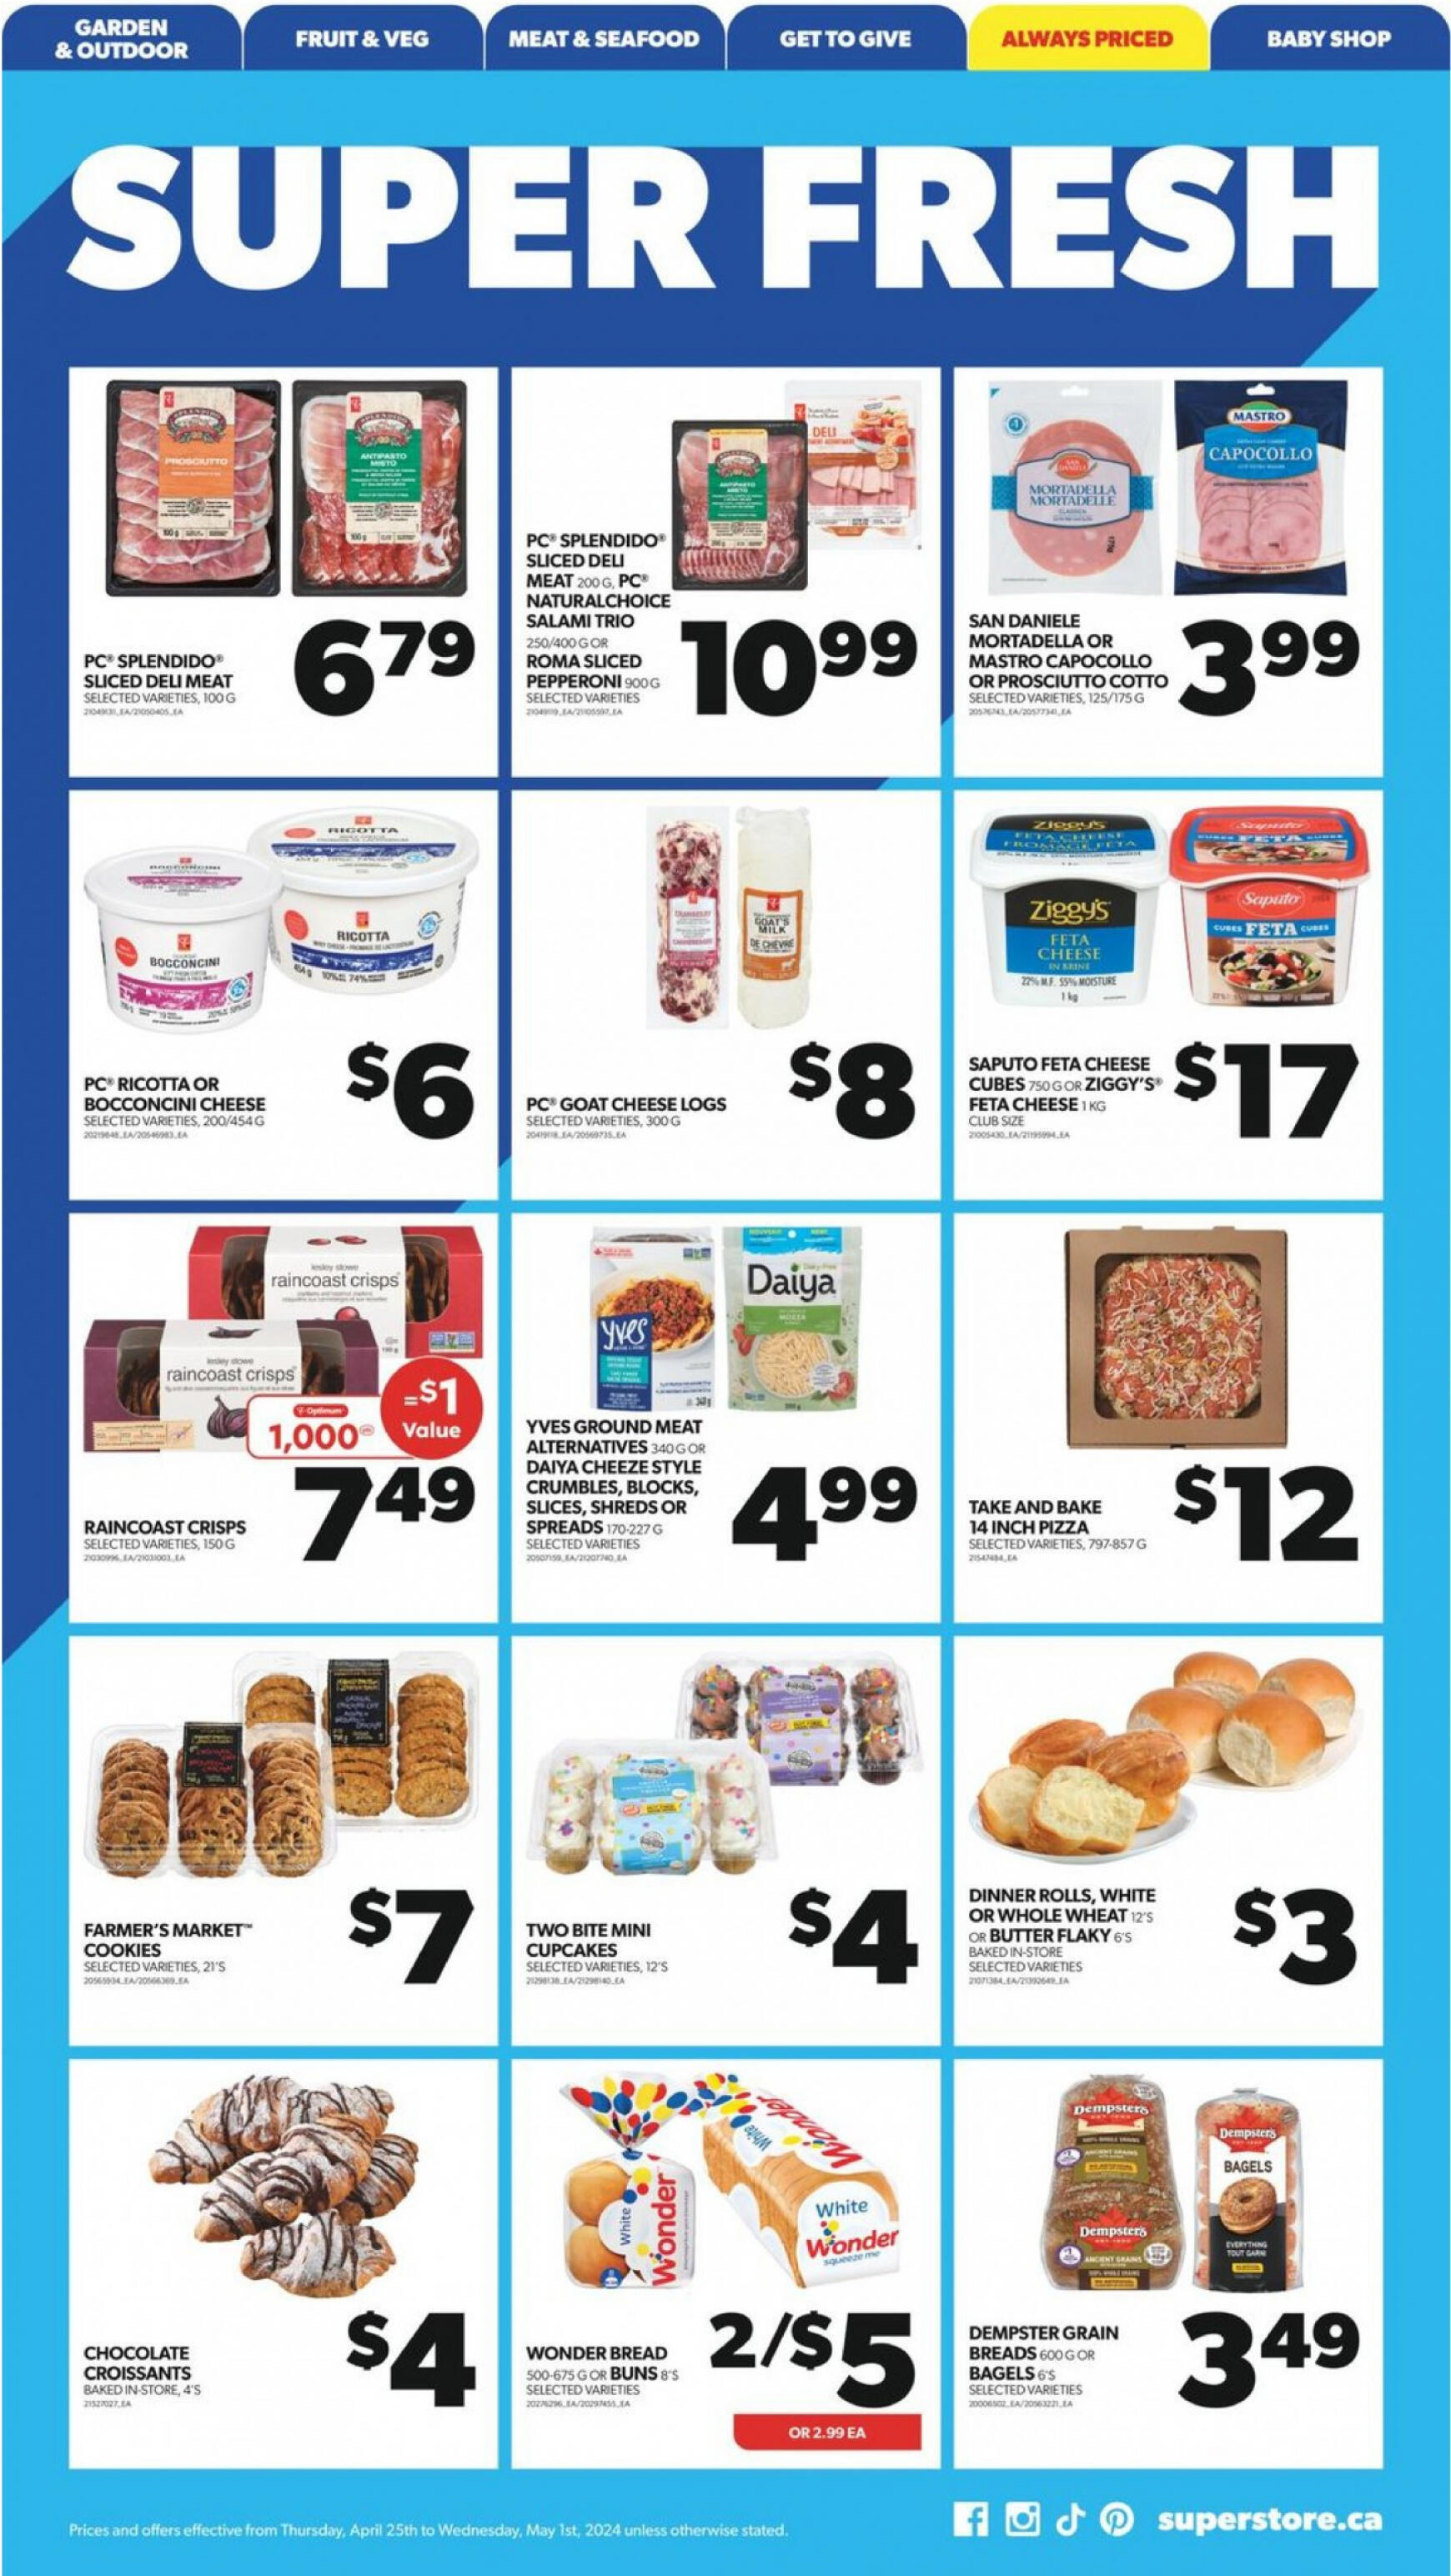 real-canadian-superstore - Real Canadian Superstore flyer current 01.05. - 31.05. - page: 10